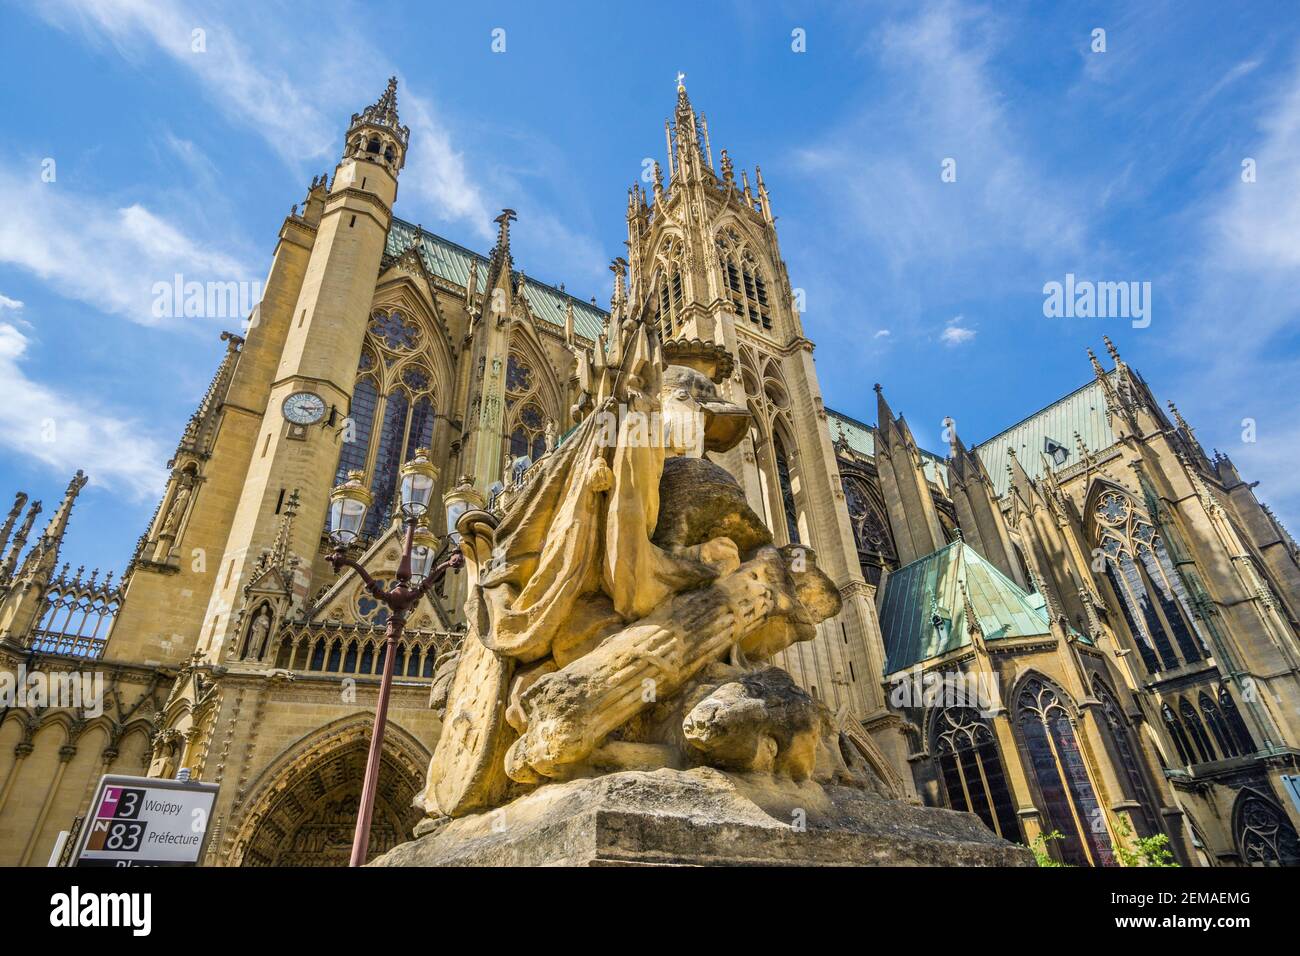 one the Place d'Armes martial symbolism sculptures with view of Metz cathedral's La Mutte tower and Horloge tower, Metz, Lorraine, Moselle department, Stock Photo